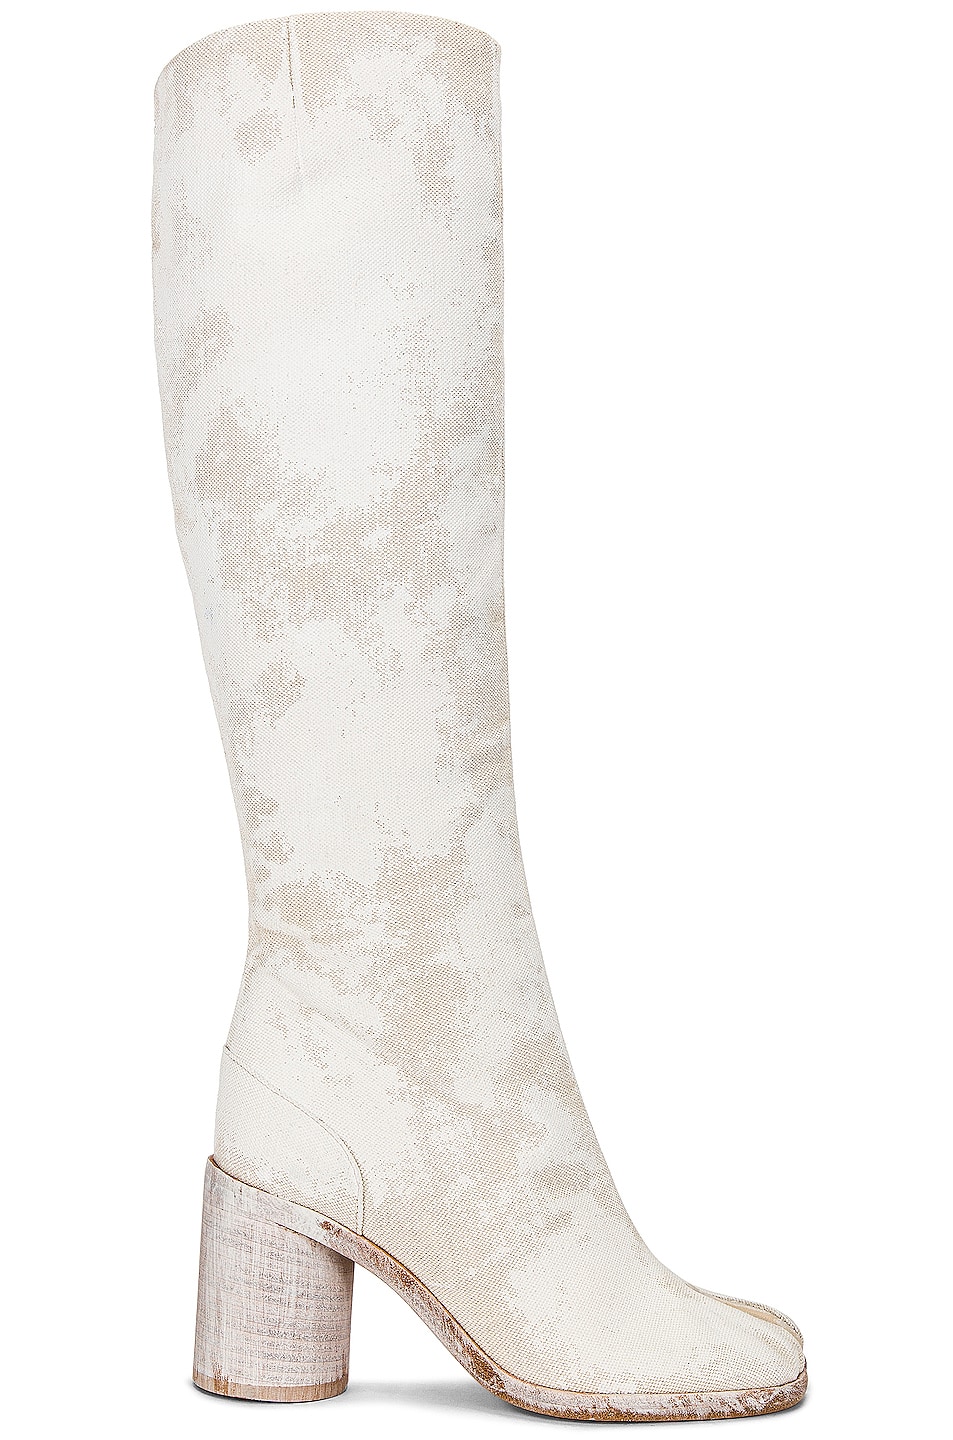 Image 1 of Maison Margiela Tall Tabi Boots in White Sand & White